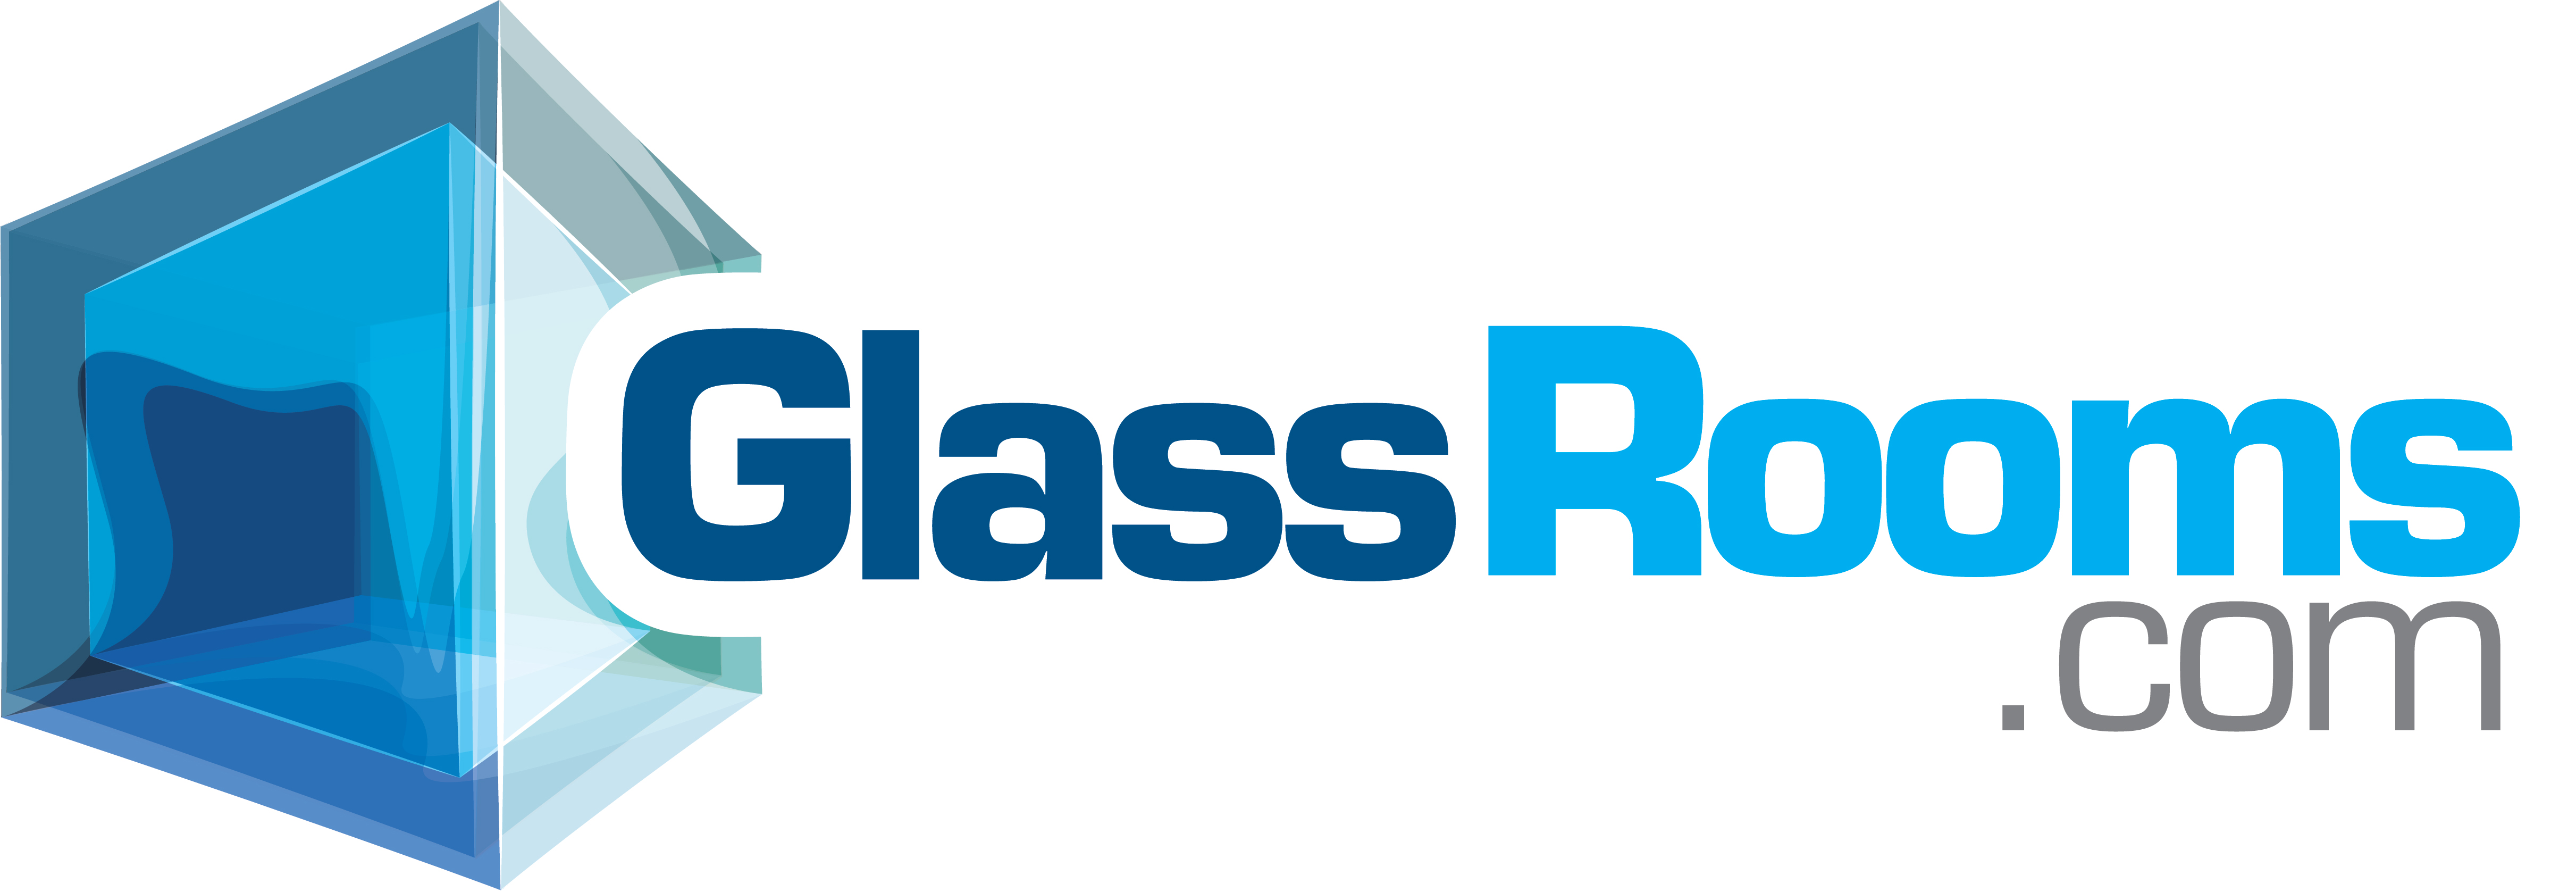 Glass Rooms Middle East Logo